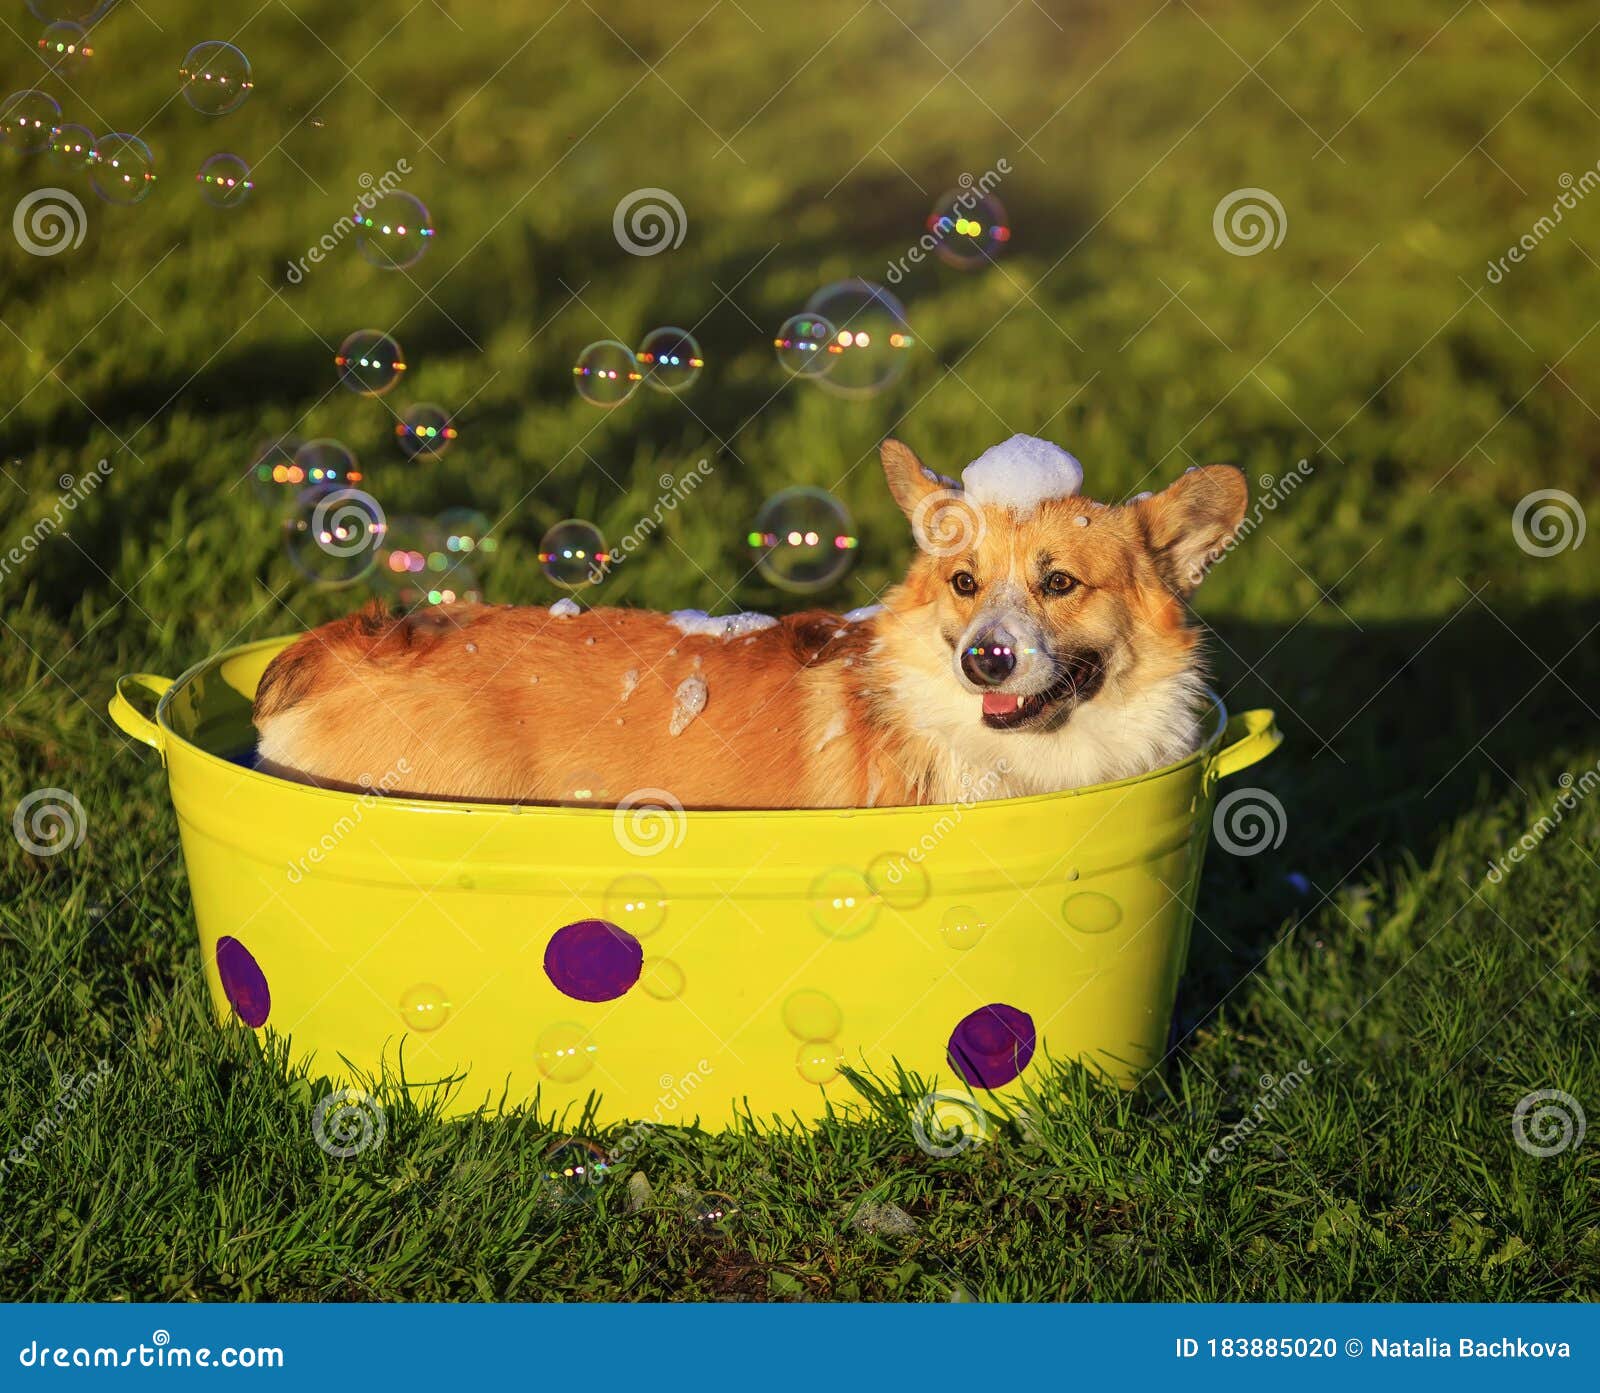 Portrait of a Funny Corgi Dog Puppy Sitting in a Trough on the Grass in ...